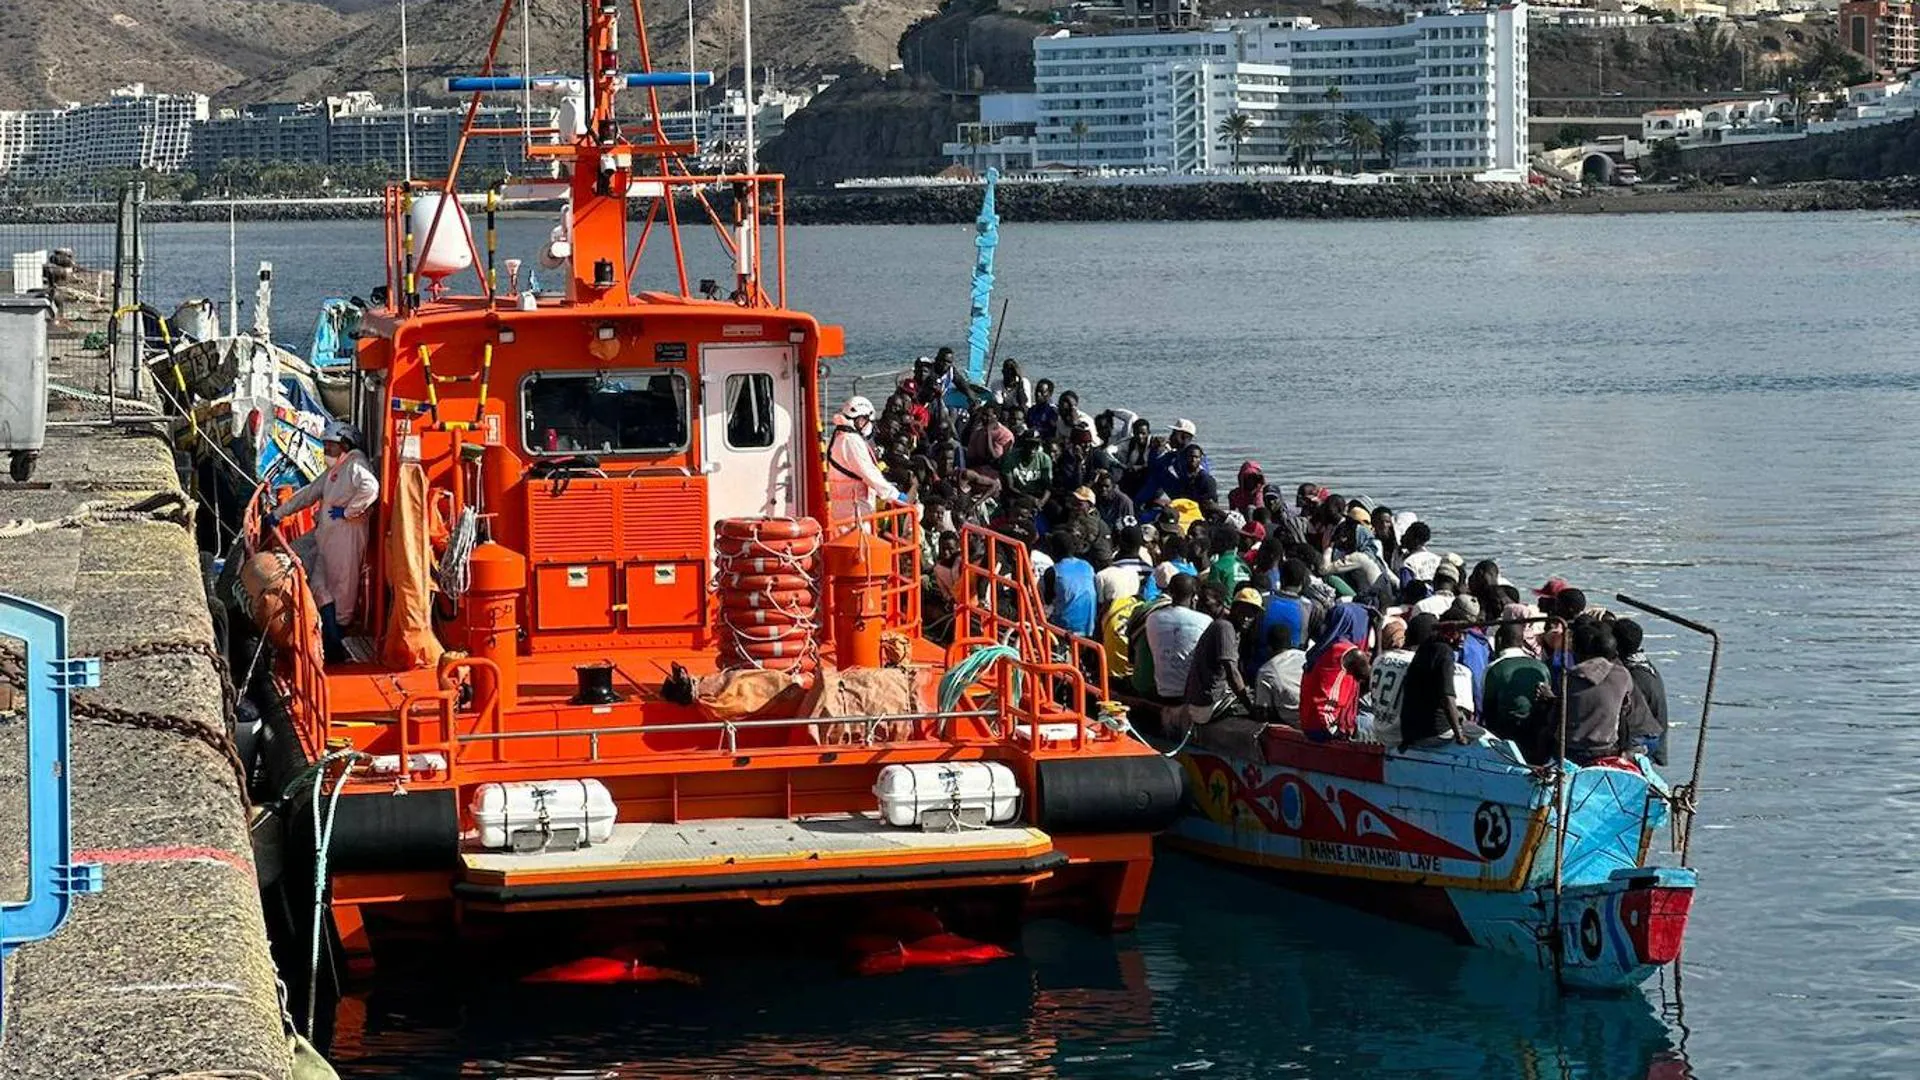 The migratory surge does not stop: more than 300 migrants reach the Canary coasts